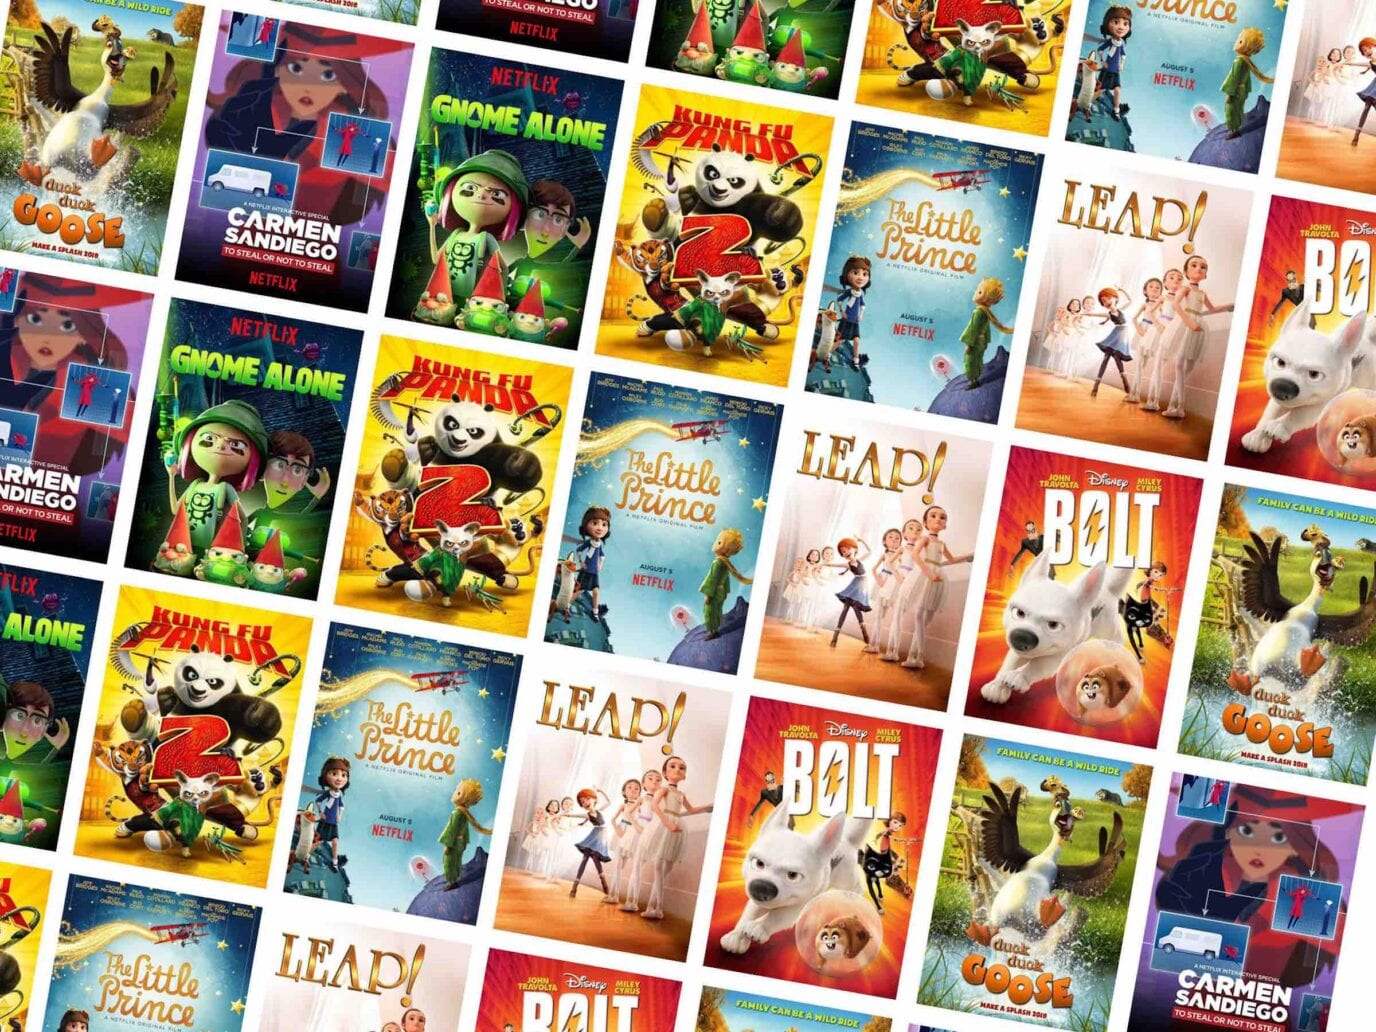 Need to distract the kids? Watch these Netflix movies with them ASAP